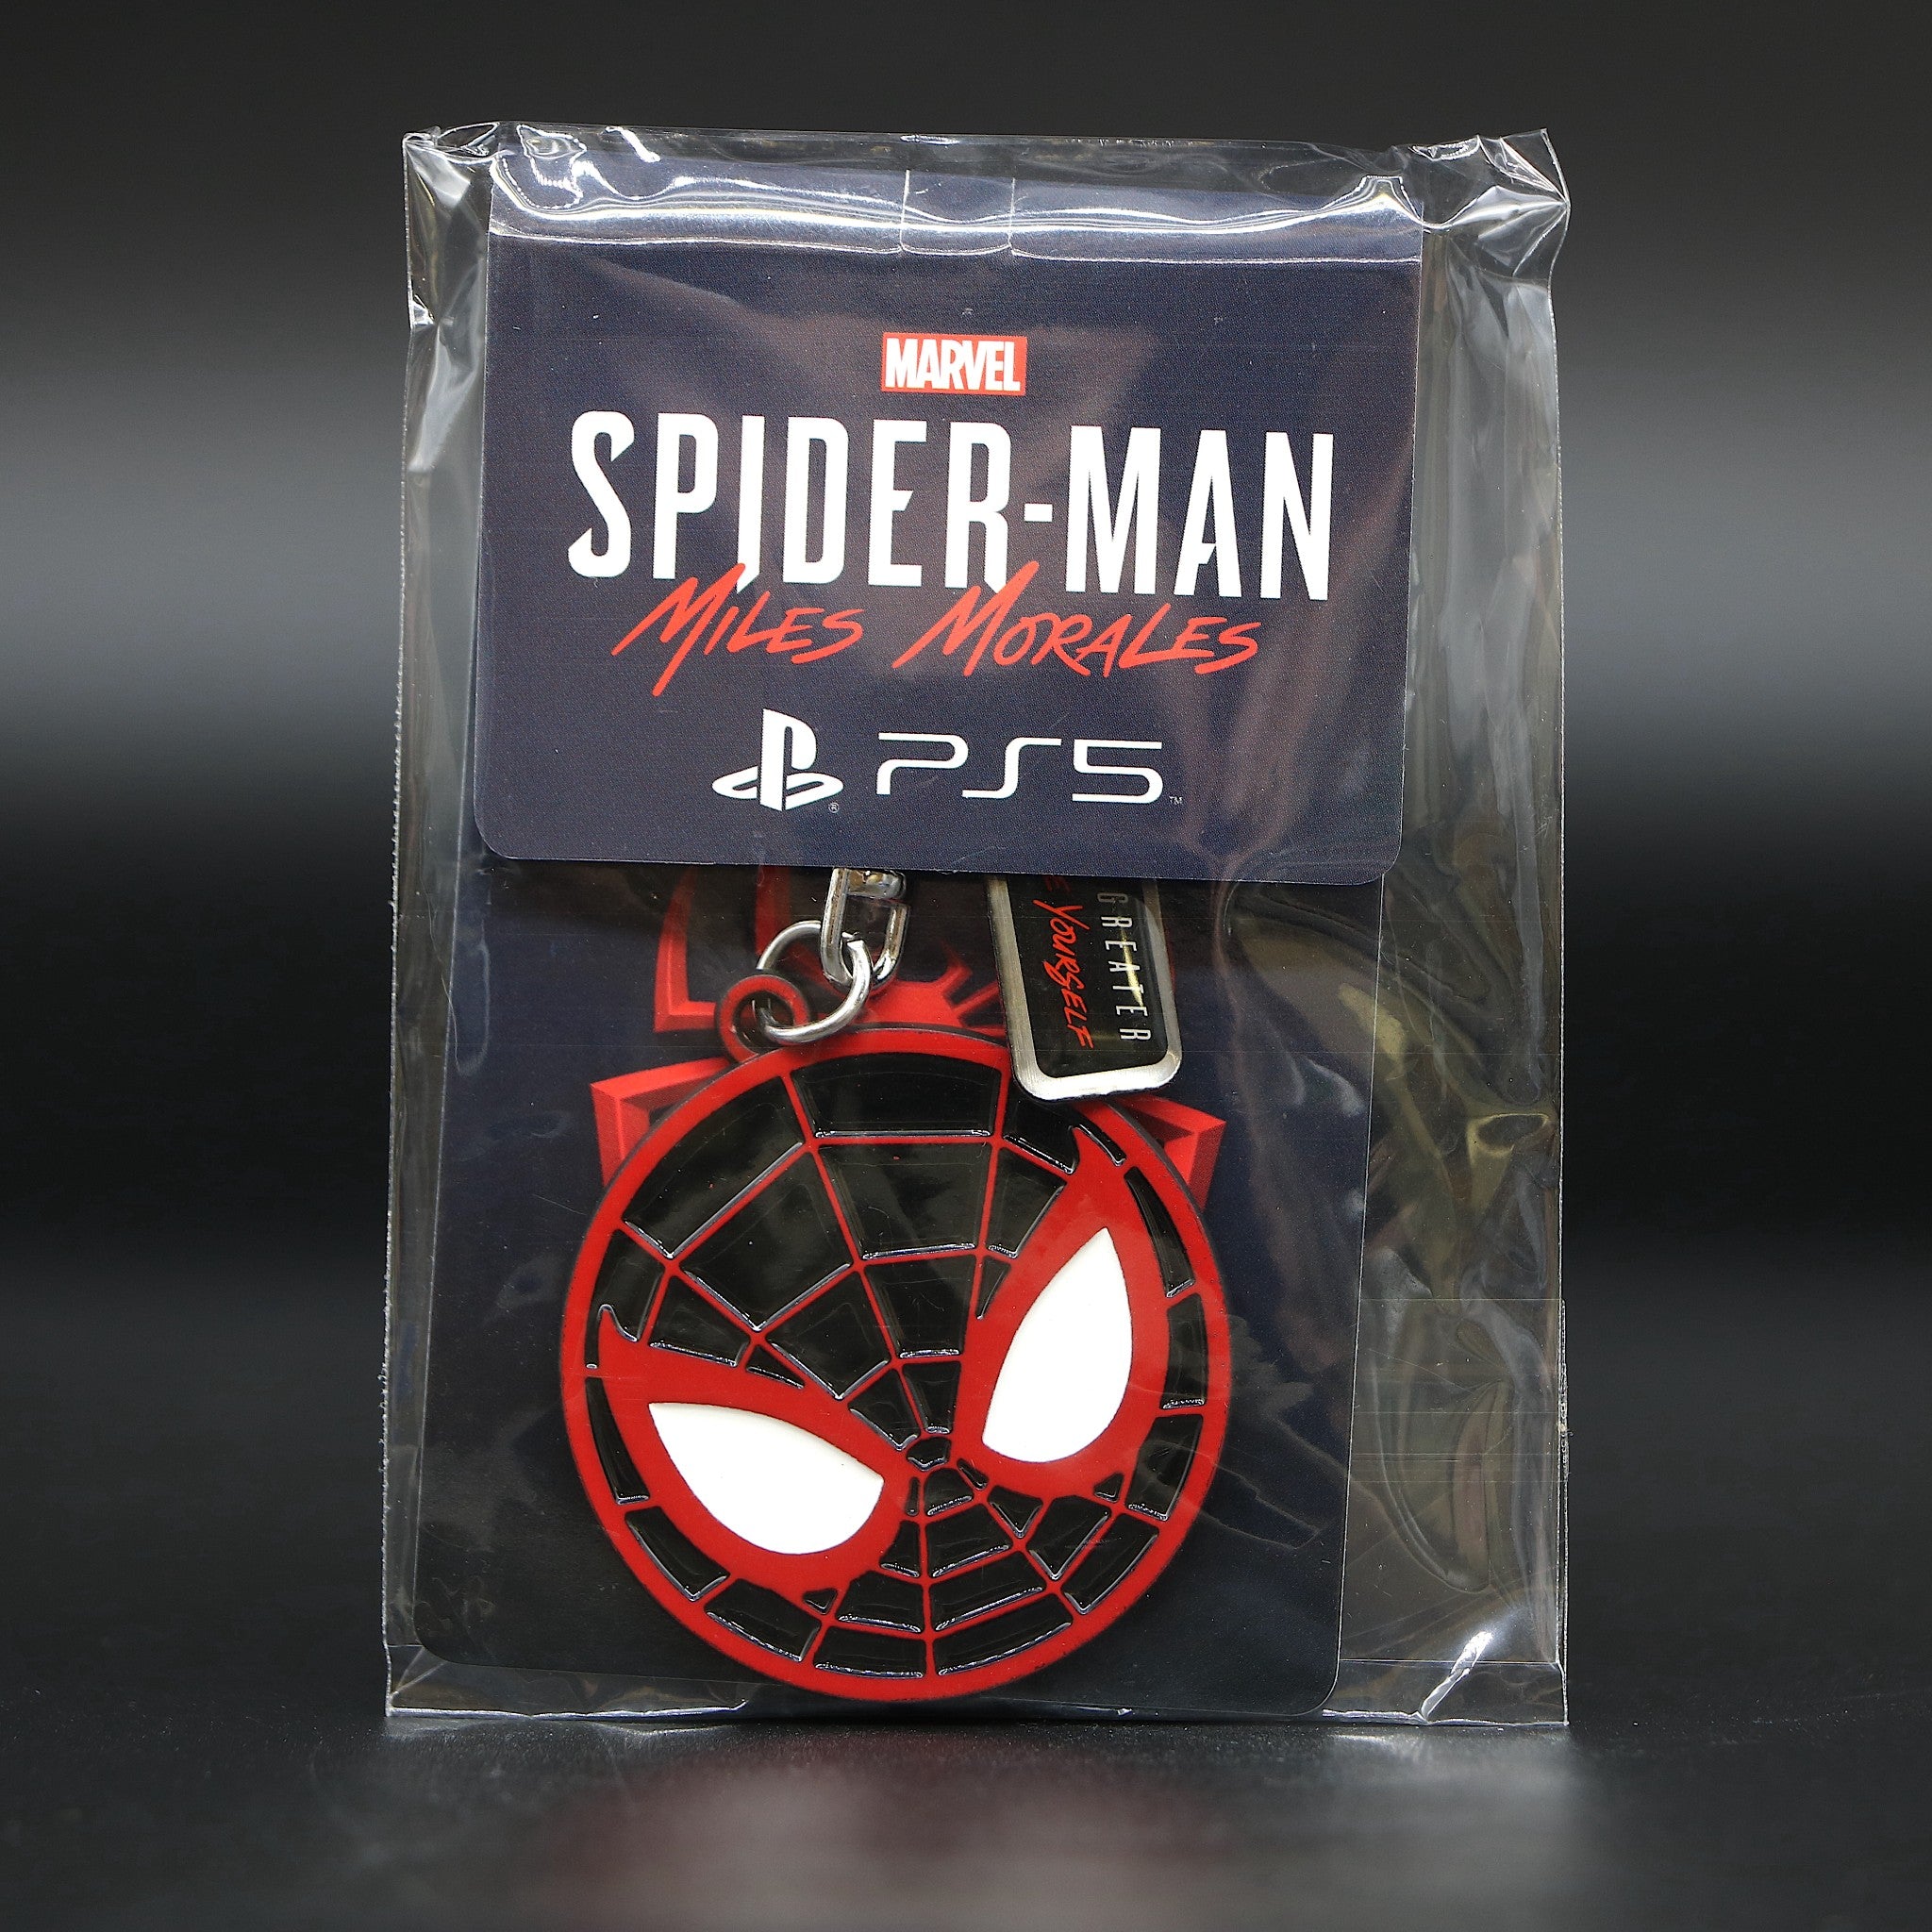 Spider-Man Miles Morales | Promo Keyring Keychain From PS4/PS5 Game | New